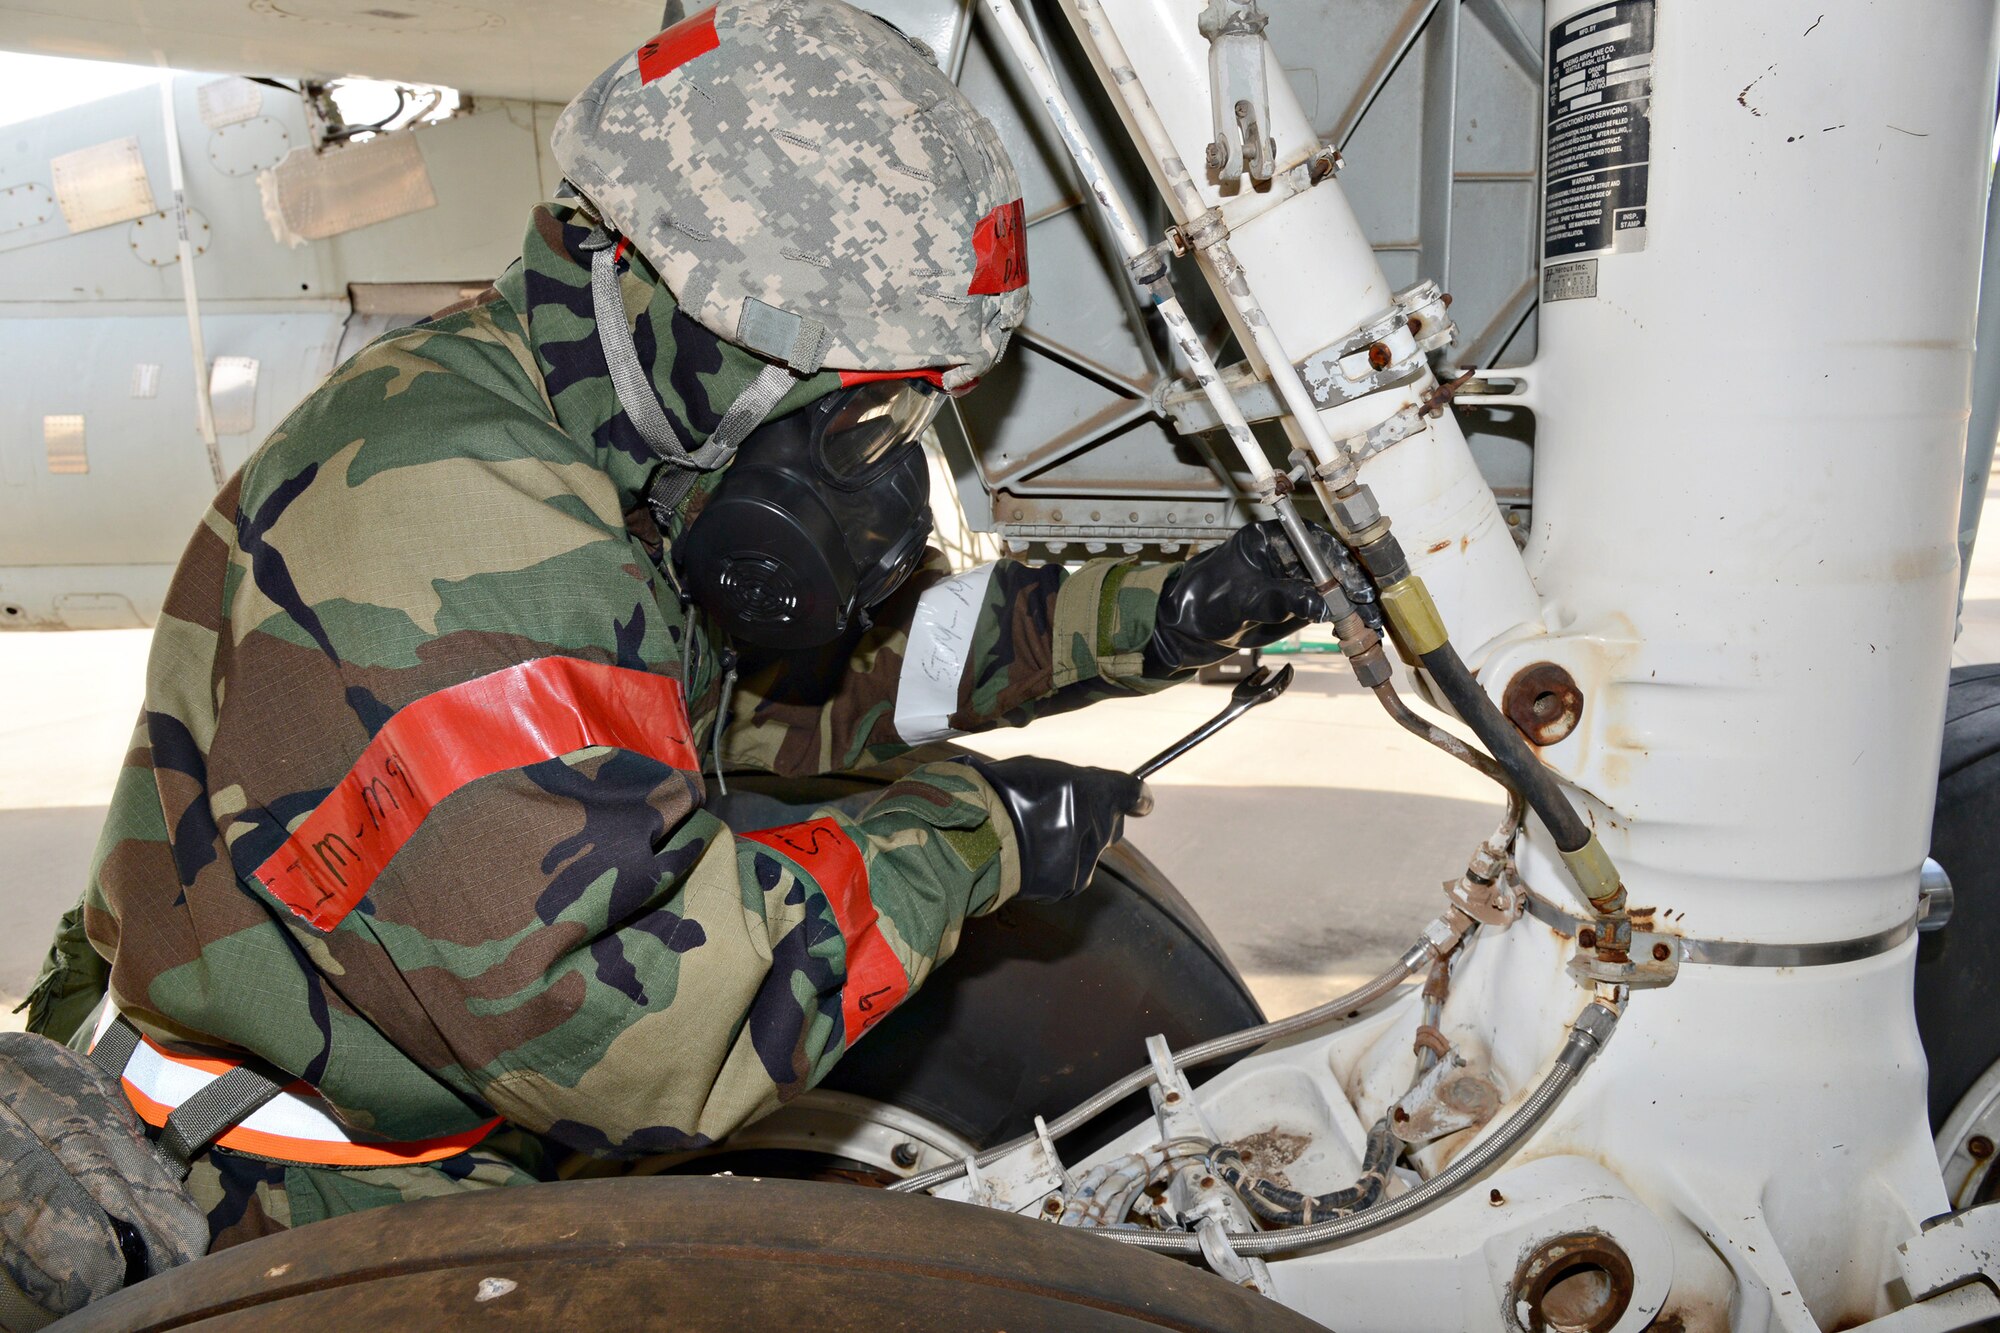 Second Lt. David Durham performs a repair on a KC-135 hydraulics line during a recent war wagon exercise for the 76th Aircraft Maintenance Group’s Expeditionary Depot Maintenance Flight. The flight consists of 25 personnel that provide aircraft battle damage repair and expeditionary depot maintenance on several aircraft. (Air Force photo by Kelly White)